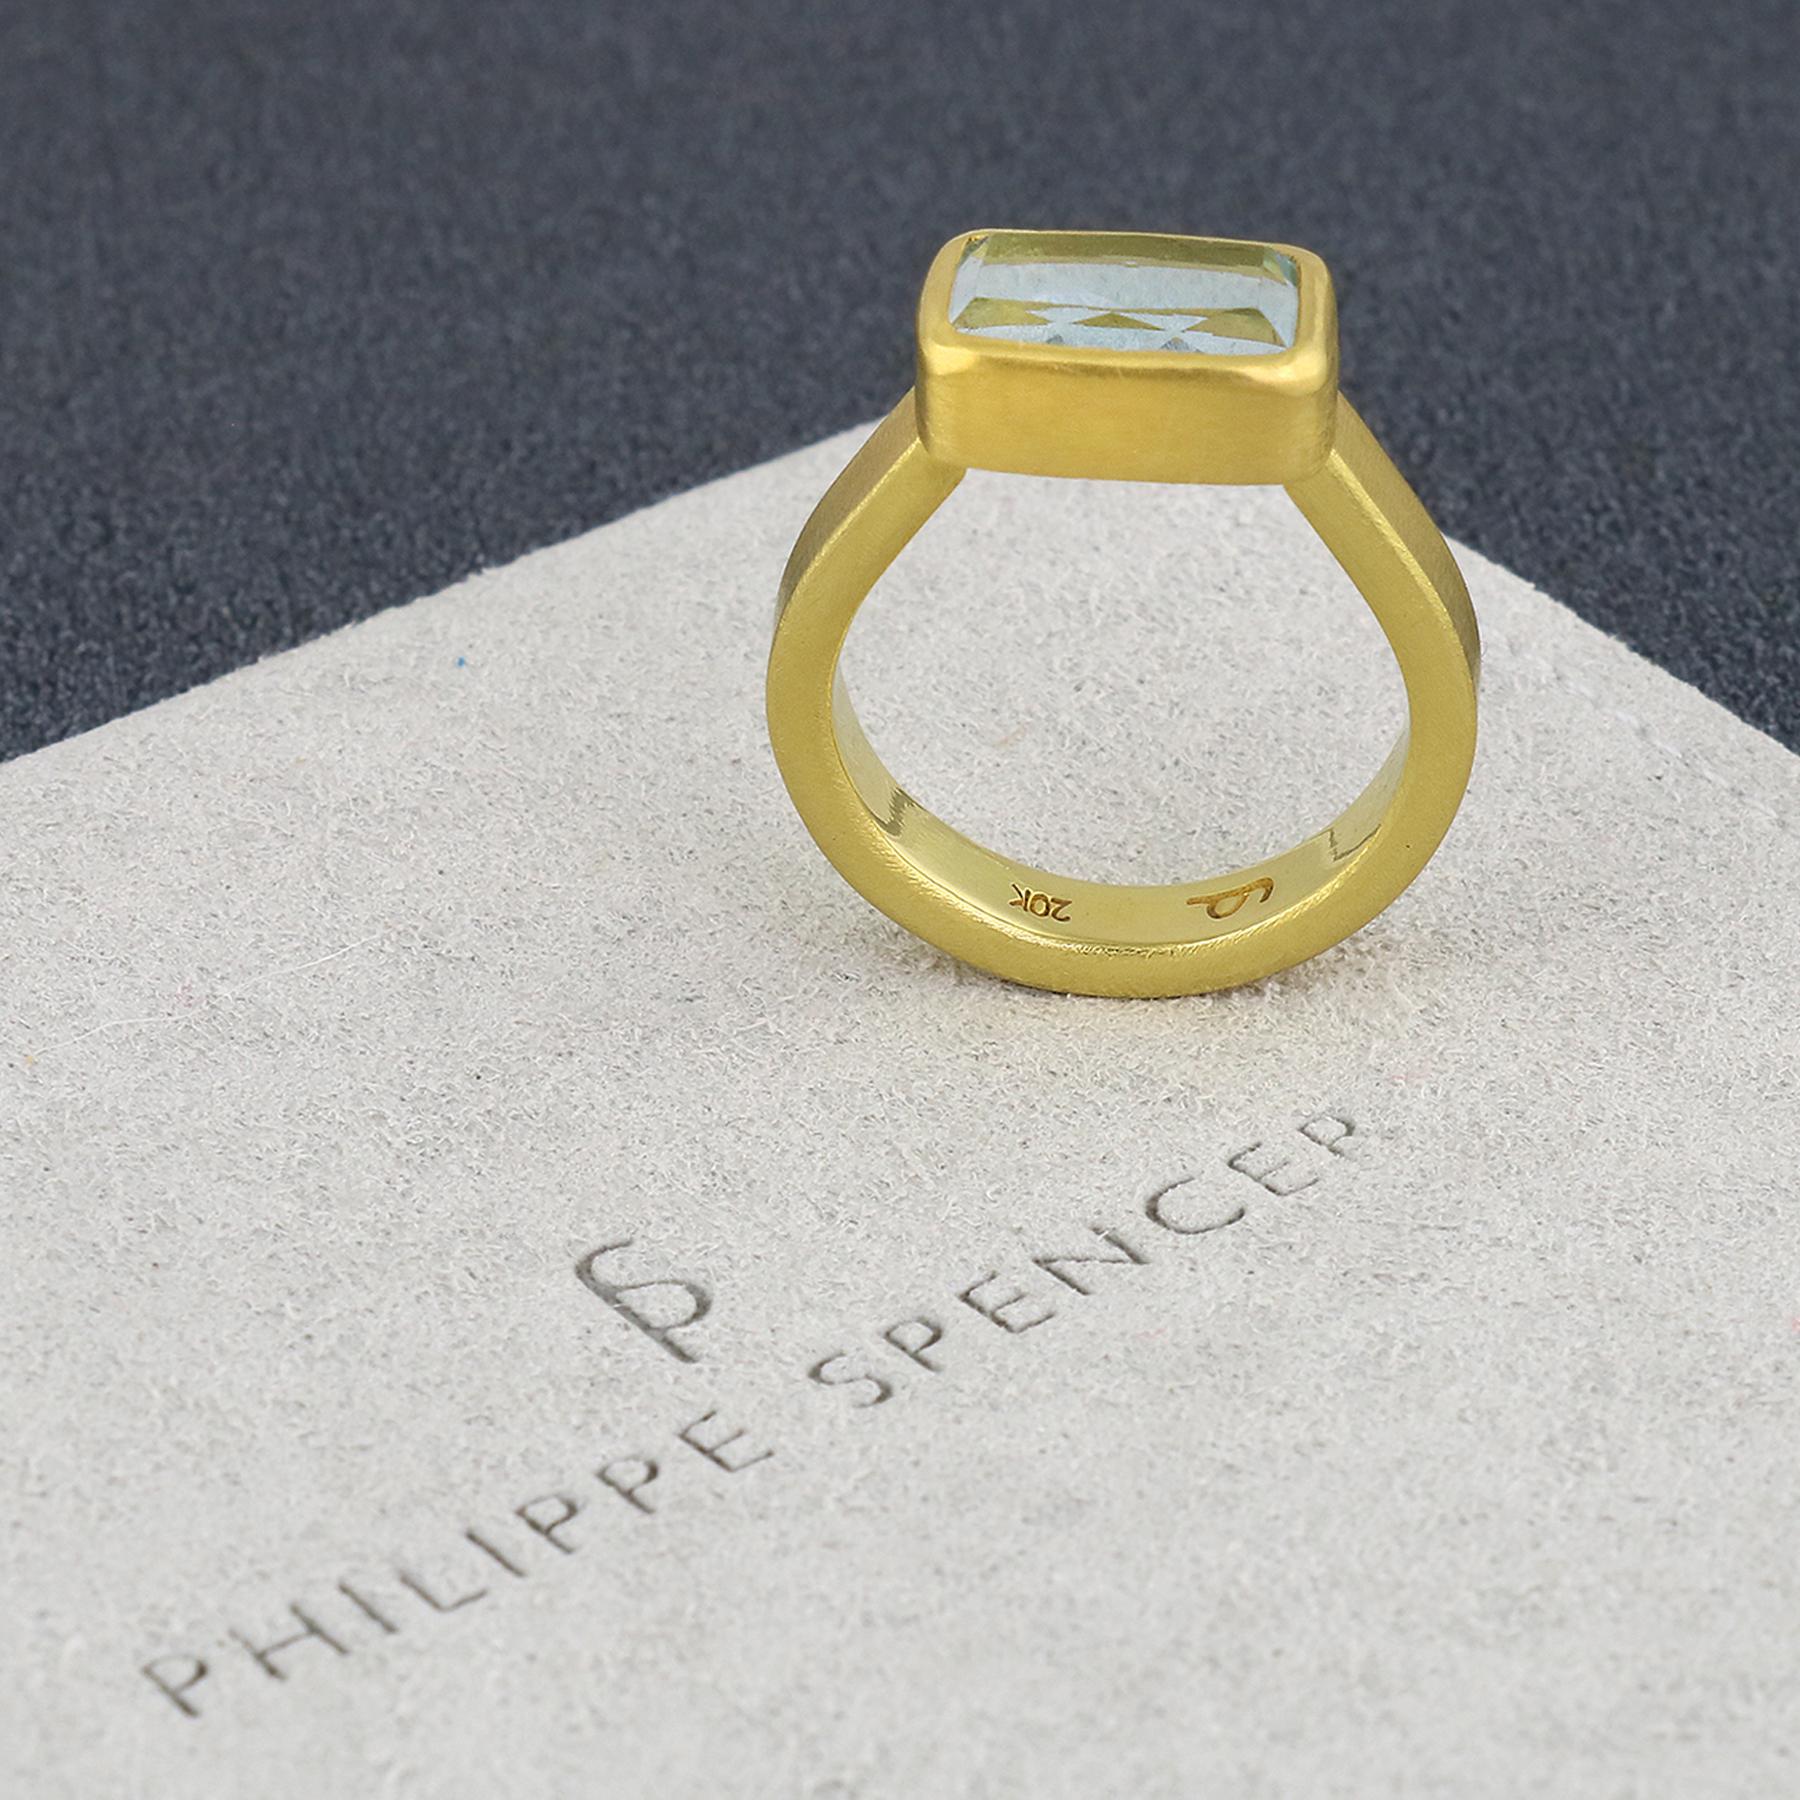 PHILIPPE SPENCER - 4.03 Ct. Extra - Fine Rectangle Cushion Cut Aquamarine  wrapped in backless 22K Gold setting with Solid 20K Gold Heavy Hand & Anvil-Forged Statement Ring.  Heavy Brushed Exterior, Mirror Polished Interior Finish.  Size 6, and is